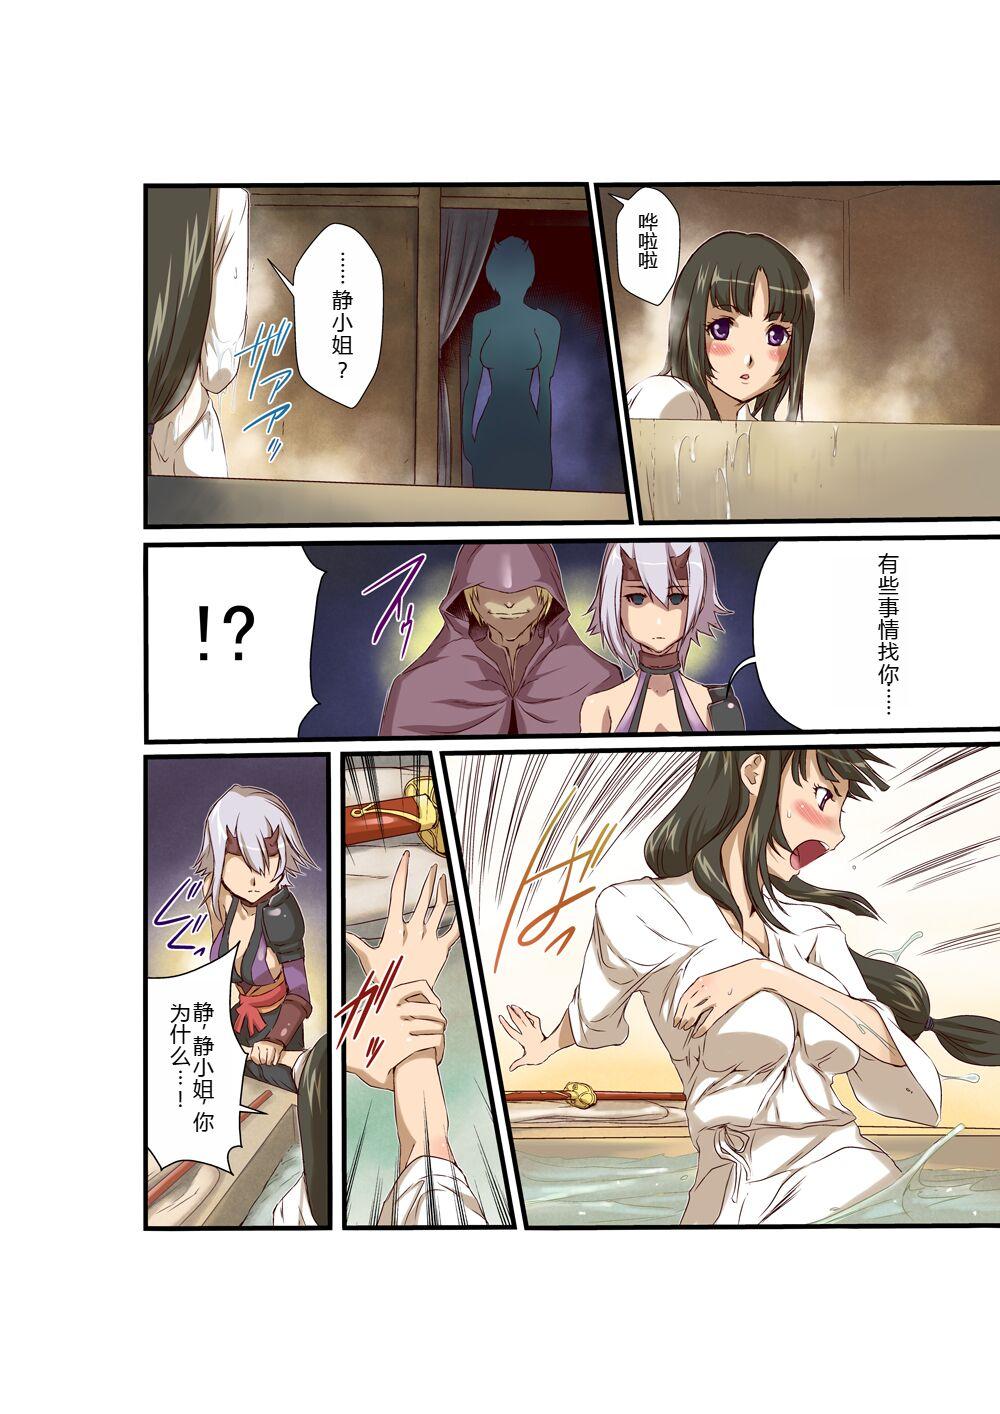 Camporn Queen's *lade Mind-control Manga - Queens blade Facial Cumshot - Page 6